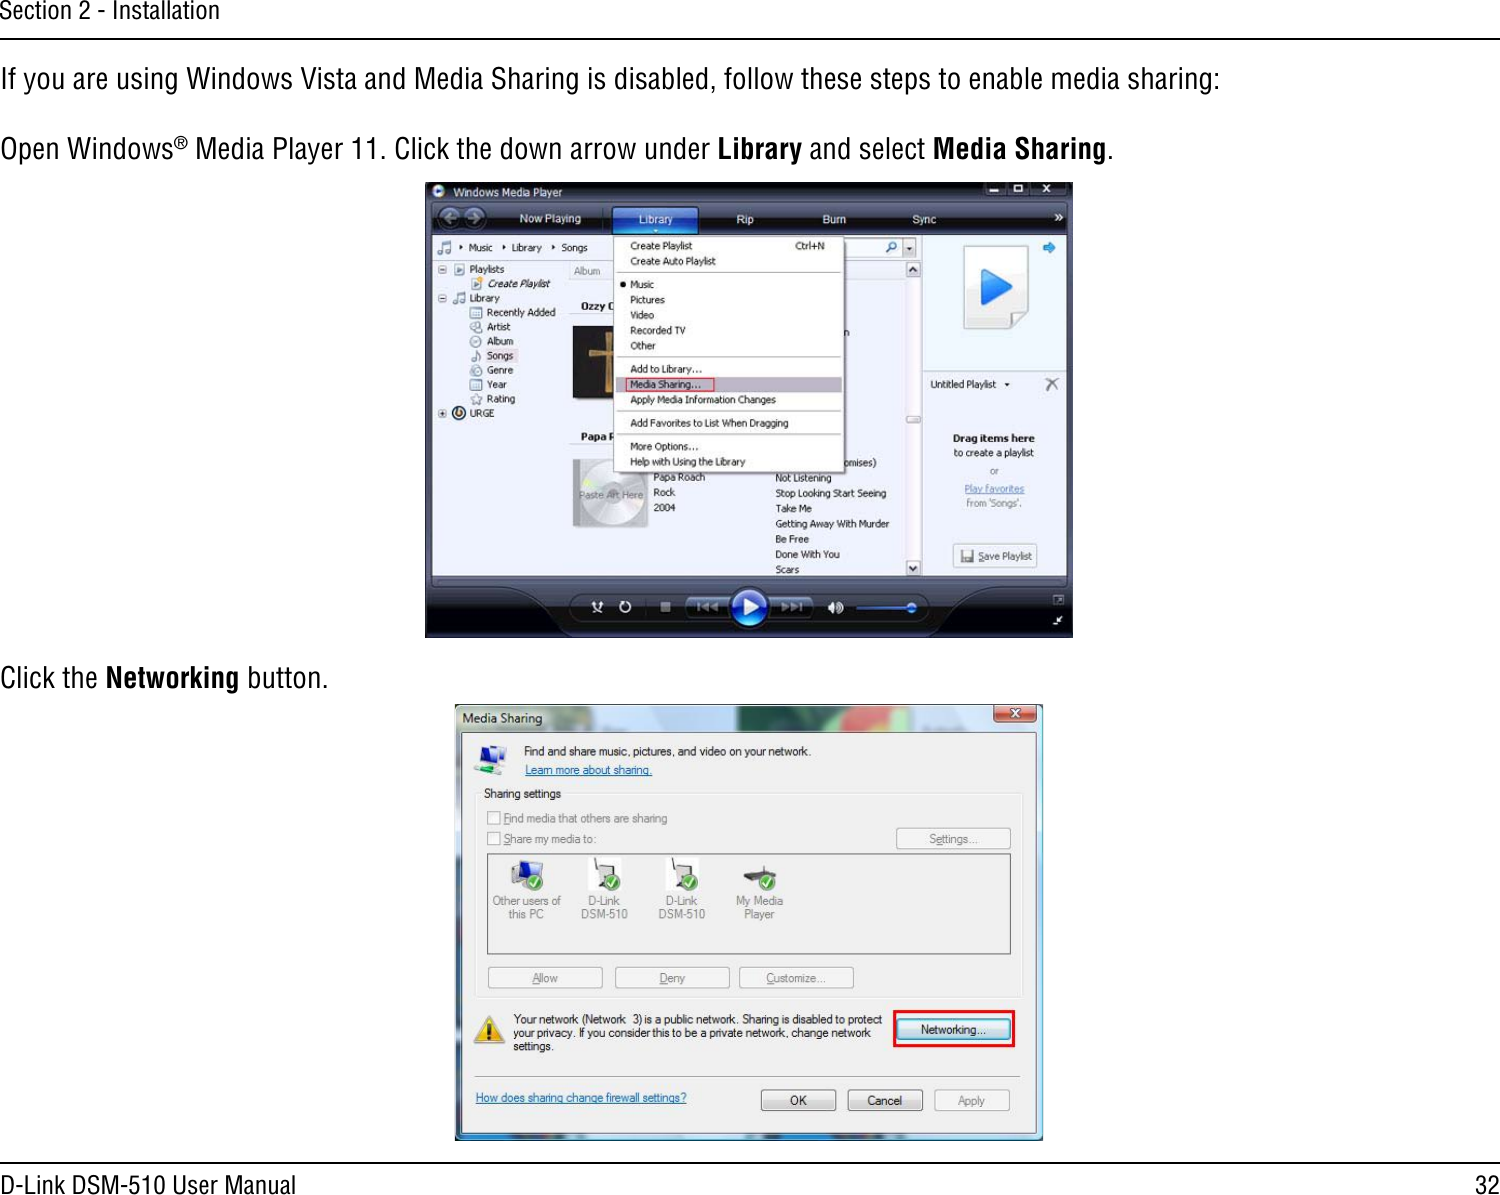 32D-Link DSM-510 User ManualSection 2 - InstallationIf you are using Windows Vista and Media Sharing is disabled, follow these steps to enable media sharing:Open Windows® Media Player 11. Click the down arrow under Library and select Media Sharing.Click the Networking button.